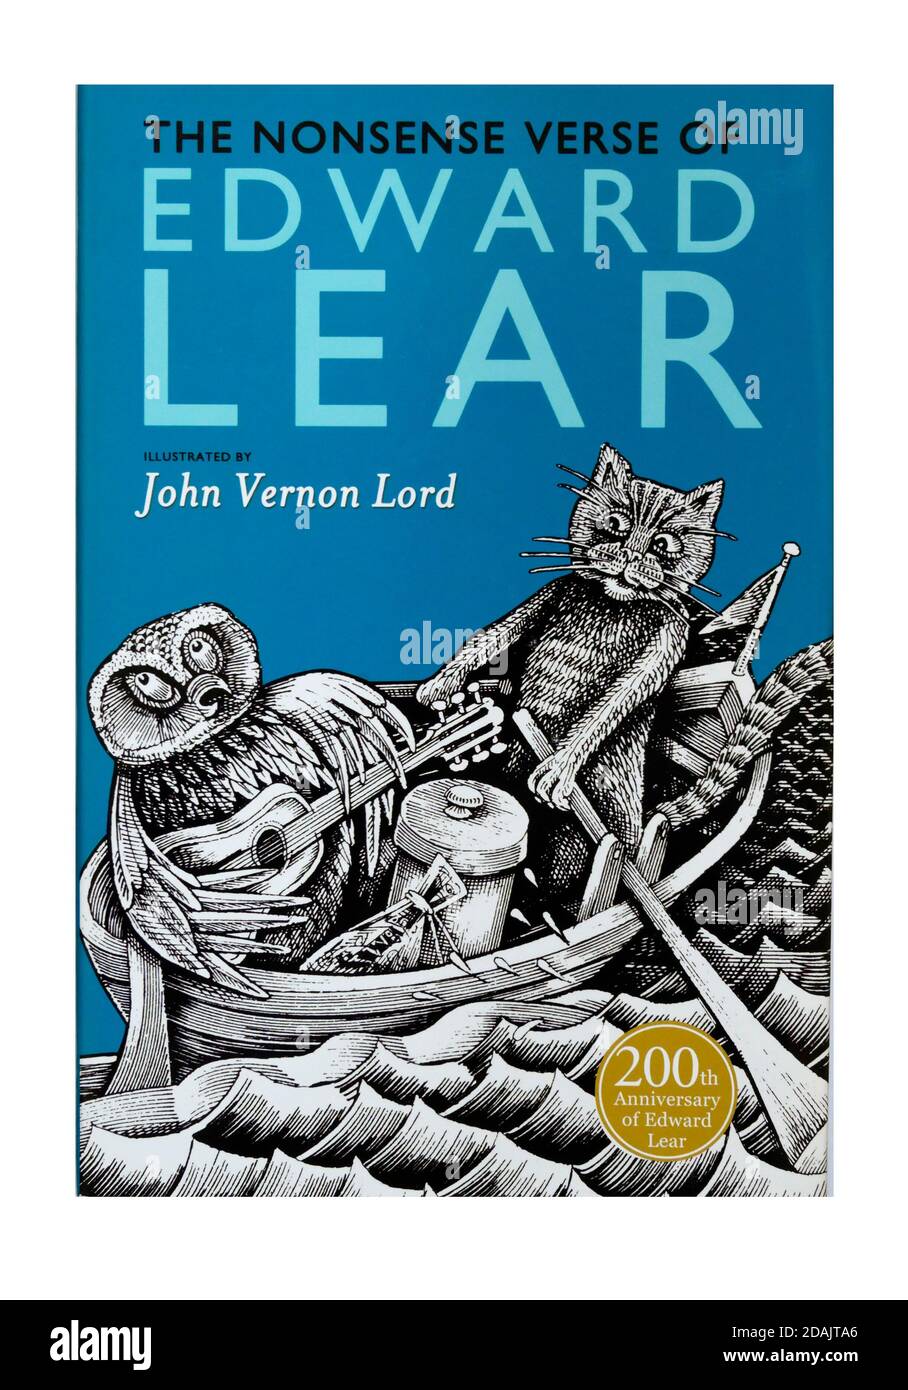 Book cover 'The Nonsense Verse of Edward Lear', illustrated by John Vernon Lord. 200th.Anniversary of Edward Lear. Stock Photo